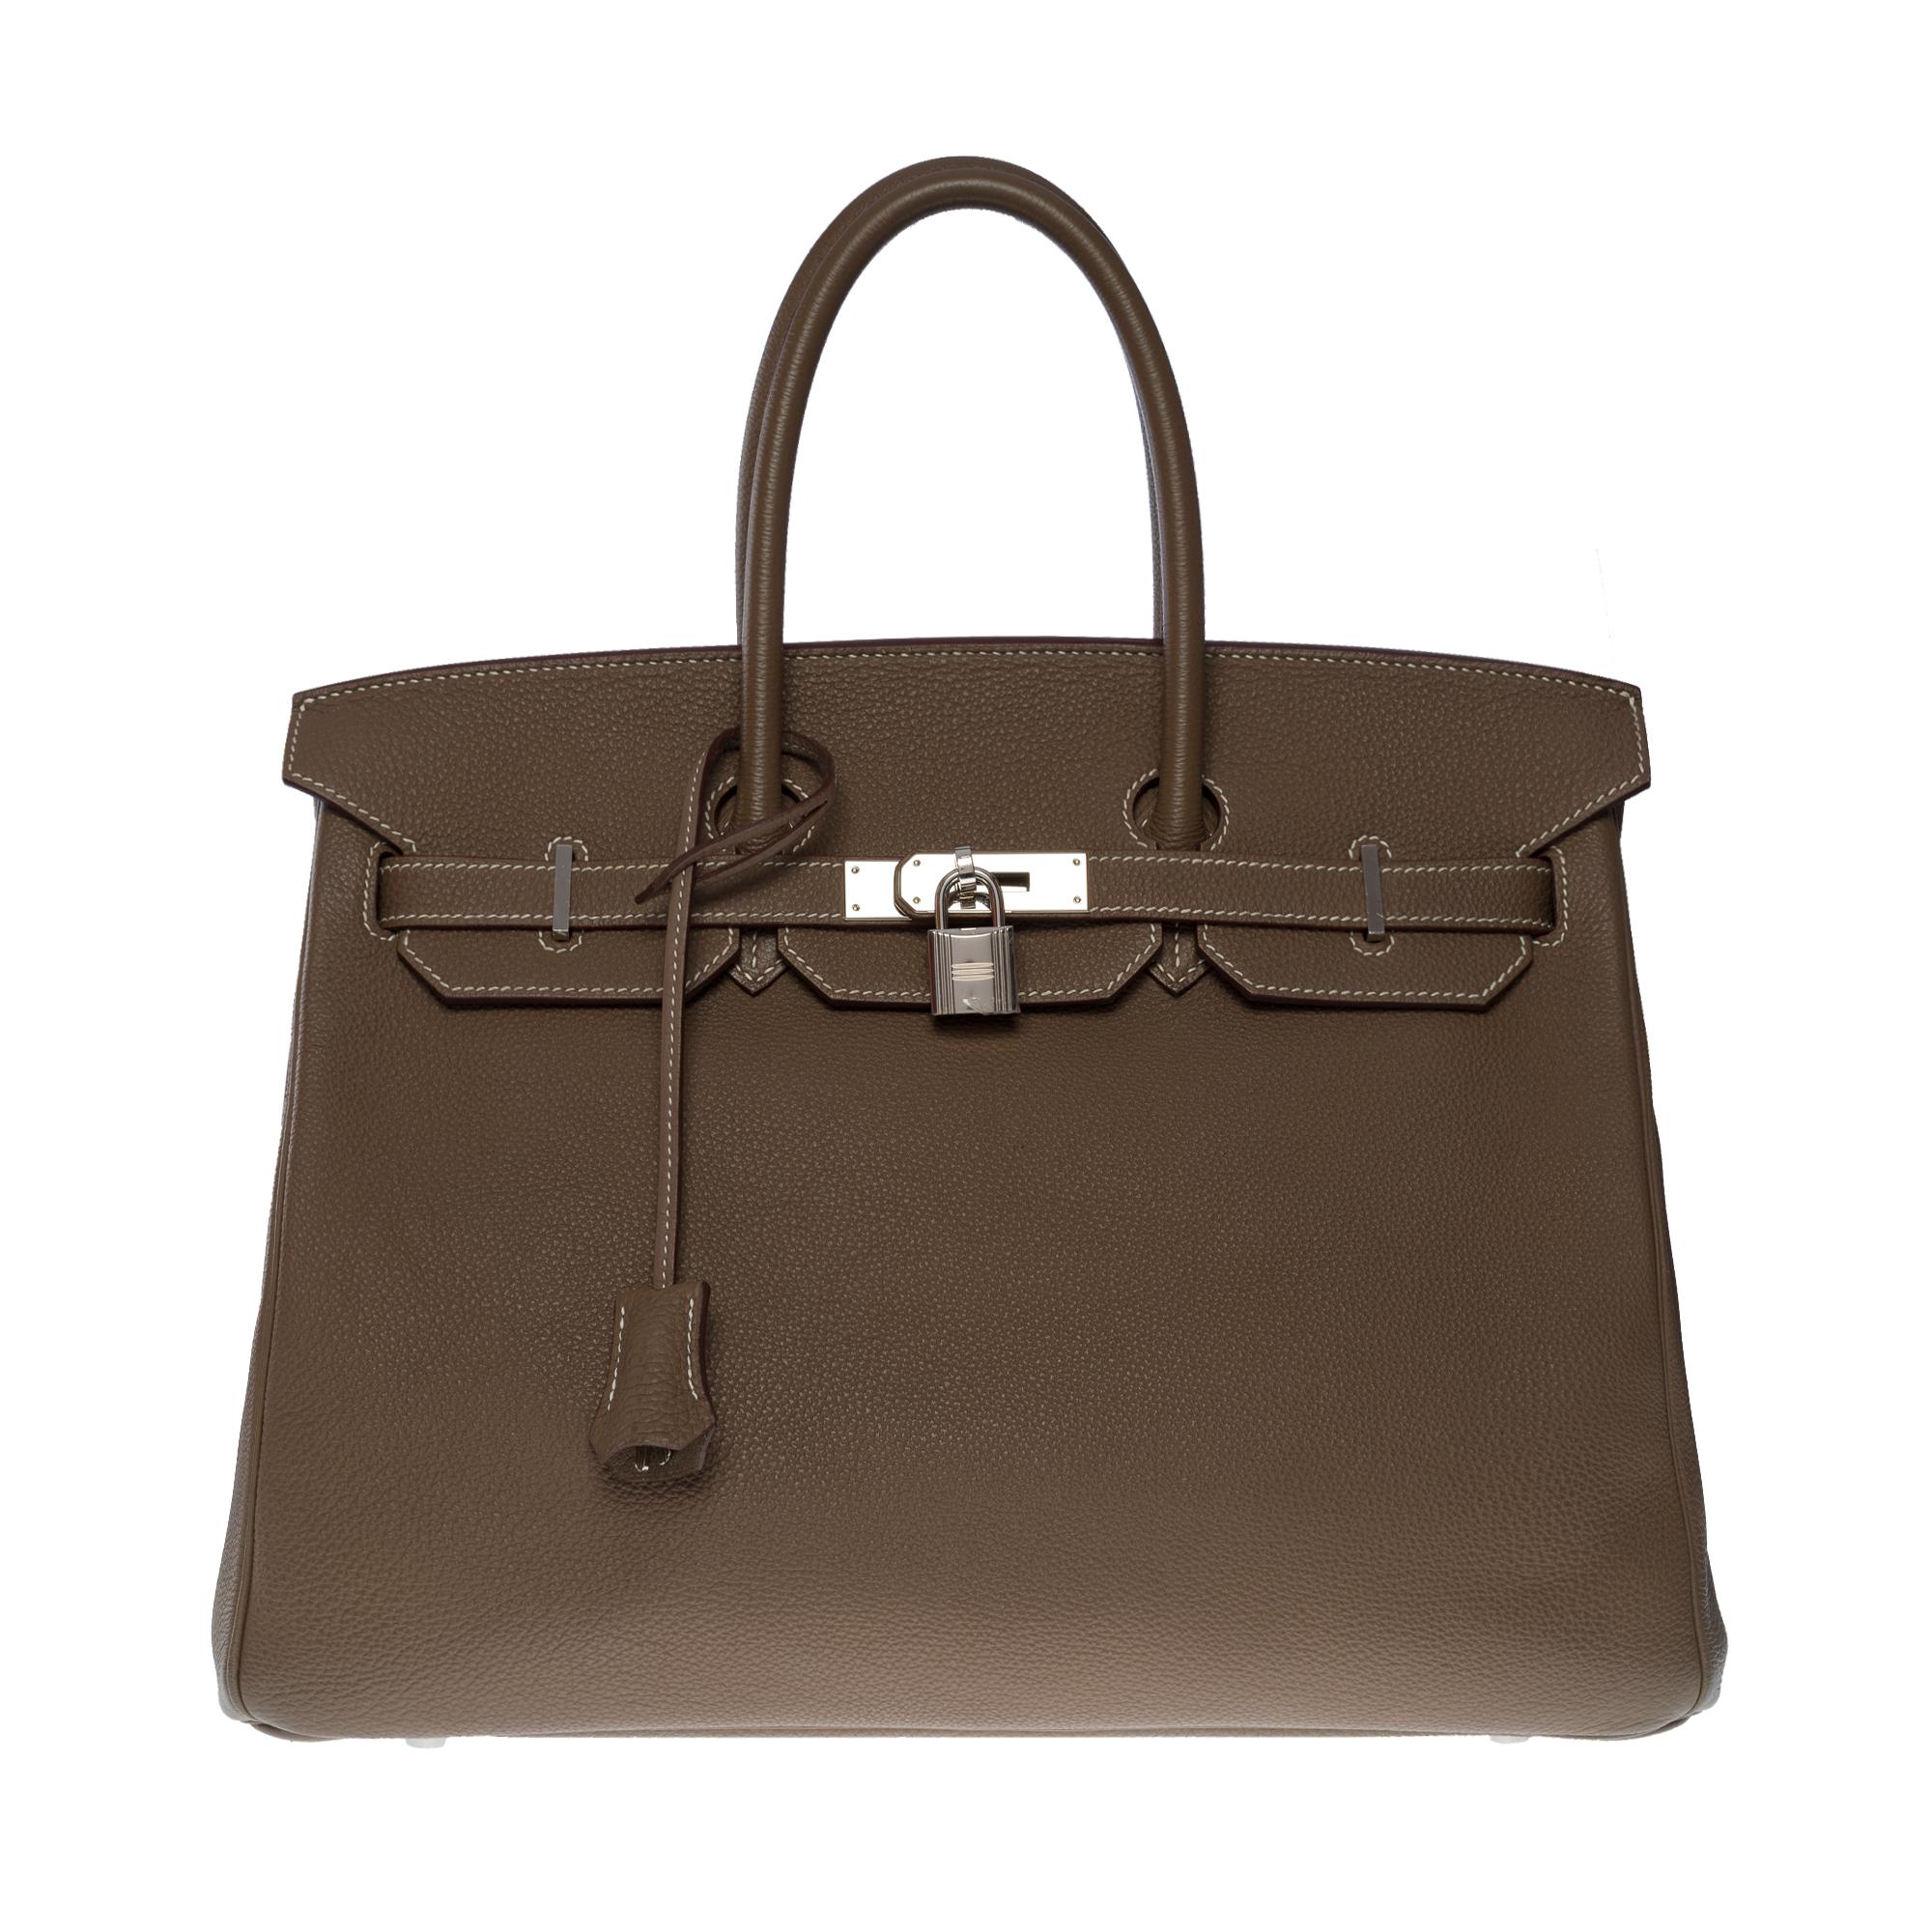 Stunning Hermes Birkin 35 handbag in Togo leather white stitching, Palladium silver metal hardware, double handle in Togo leather allowing a hand-carried

Flap closure
Inside lining in towed leather, one zippered pocket, one patch pocket
Signature: